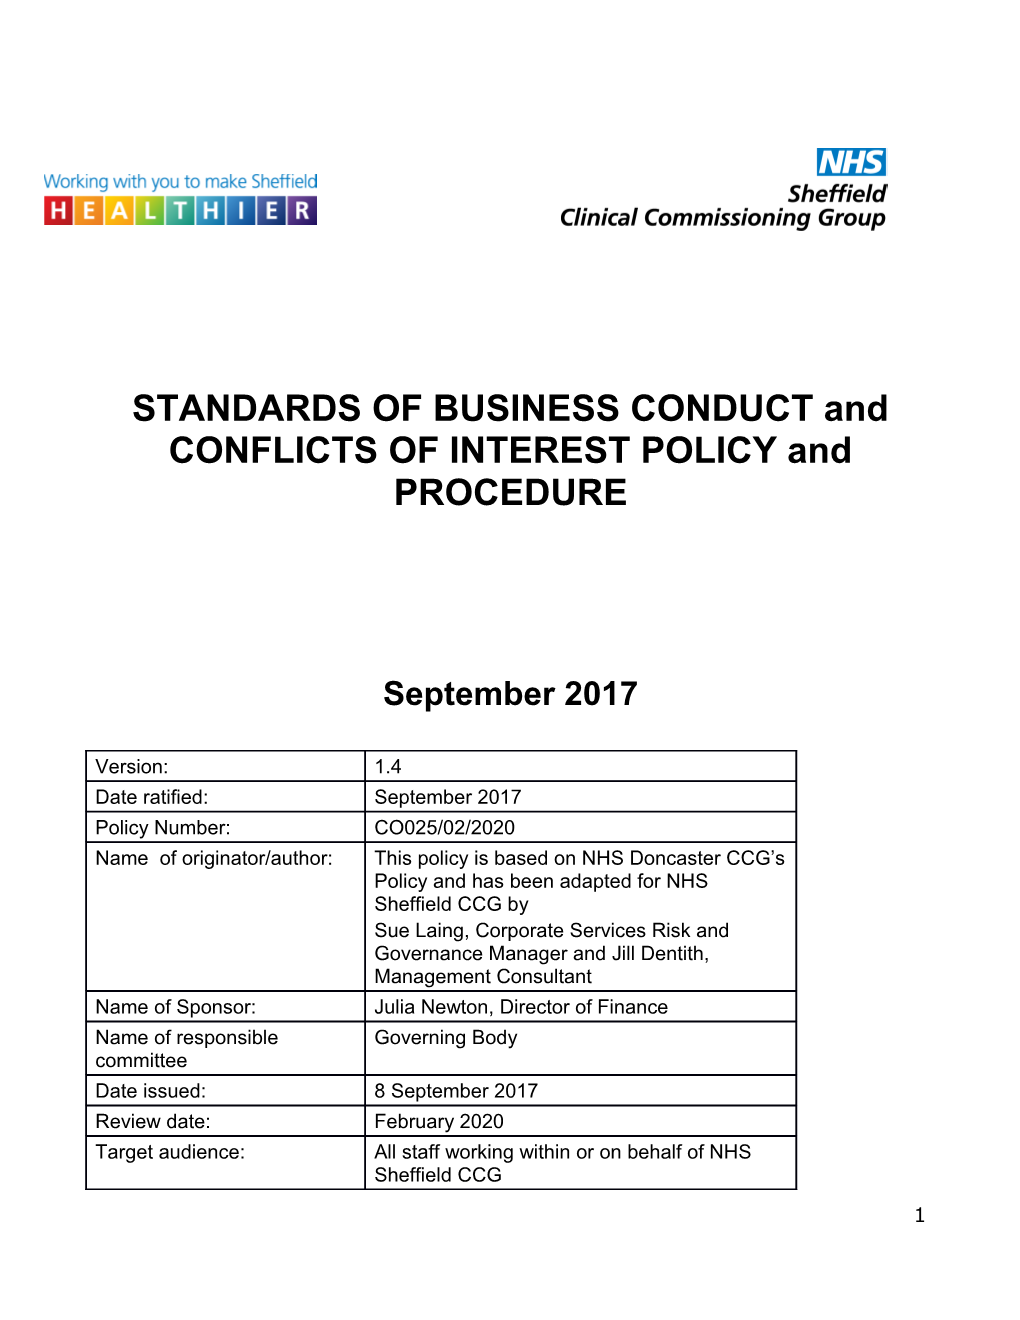 STANDARDS of BUSINESS CONDUCT and CONFLICTS of INTEREST POLICY and PROCEDURE